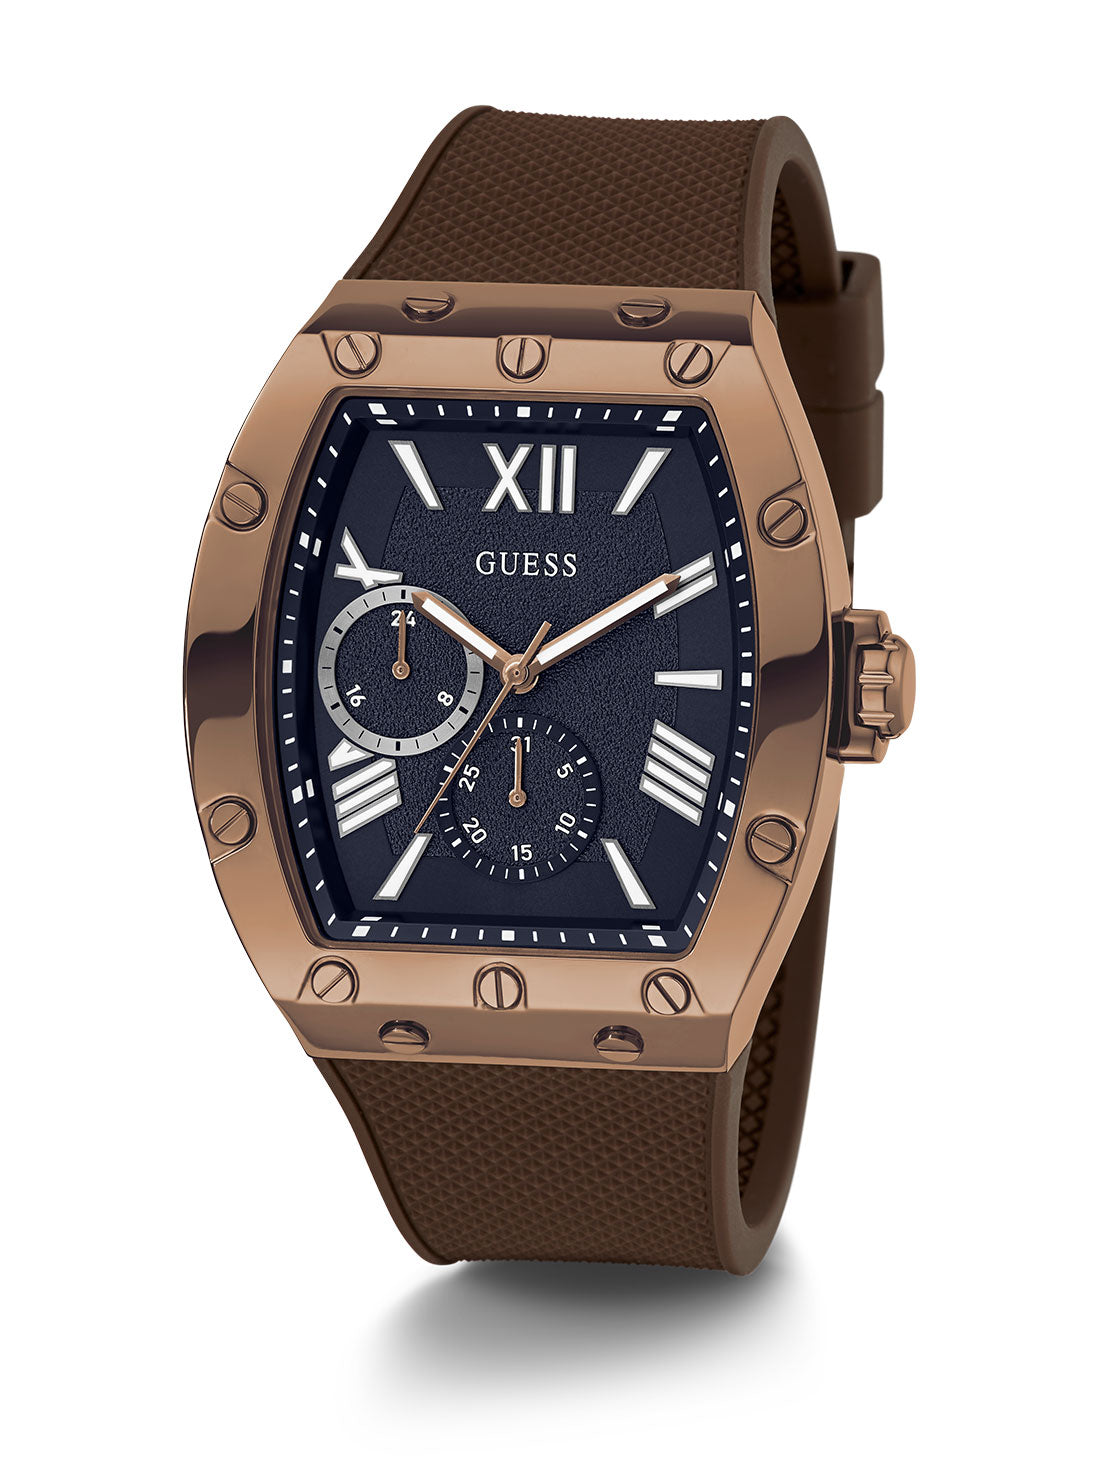 GUESS Men's Brown Falcon Silicone Watch GW0568G1 Full View